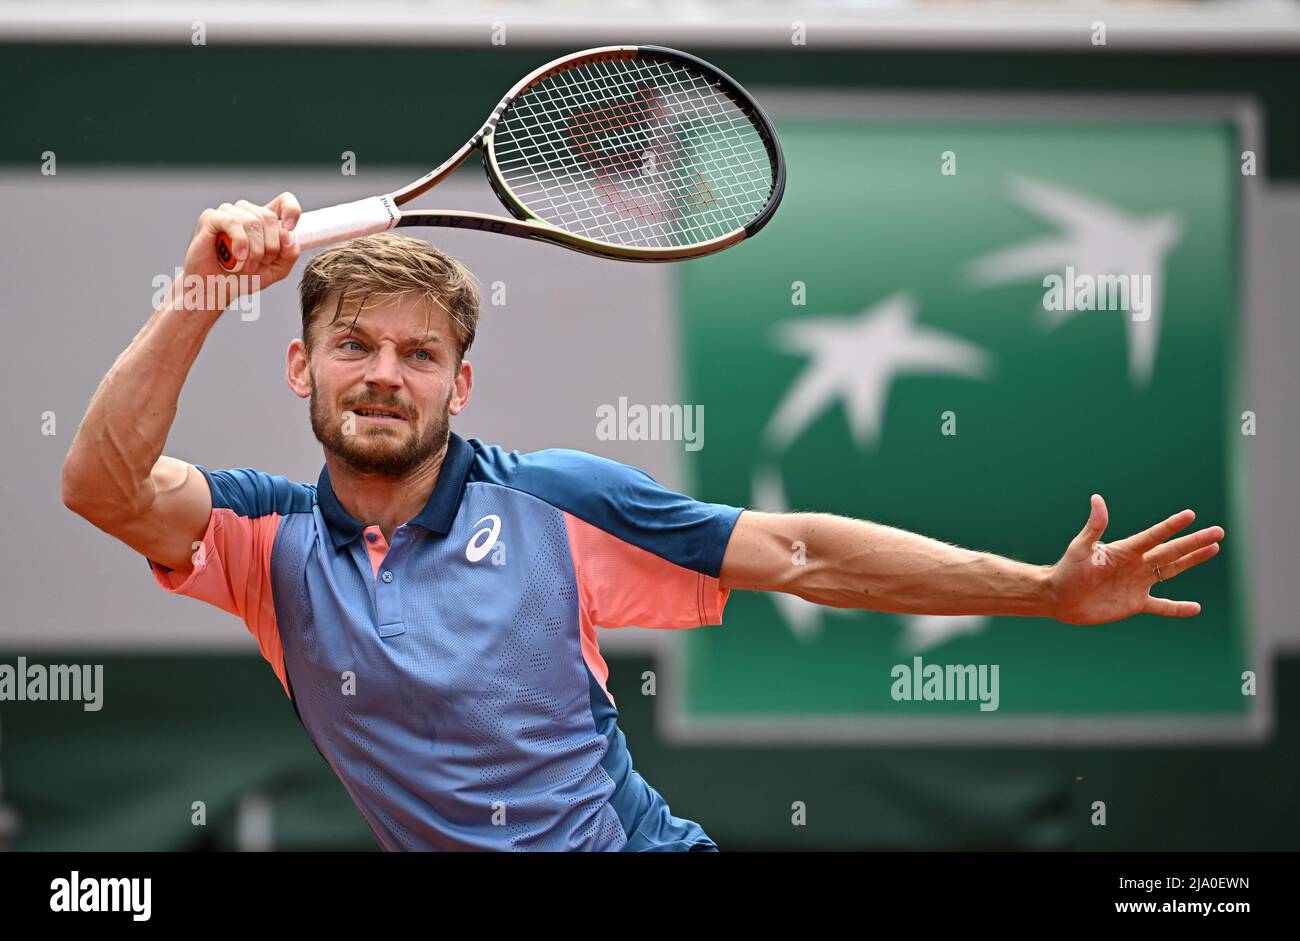 Tennis - French Open - Roland Garros, Paris, France - May 26, 2022  Belgium's David Goffin in action during his second round match against  Frances Tiafoe of the U.S. REUTERS/Dylan Martinez Stock Photo - Alamy